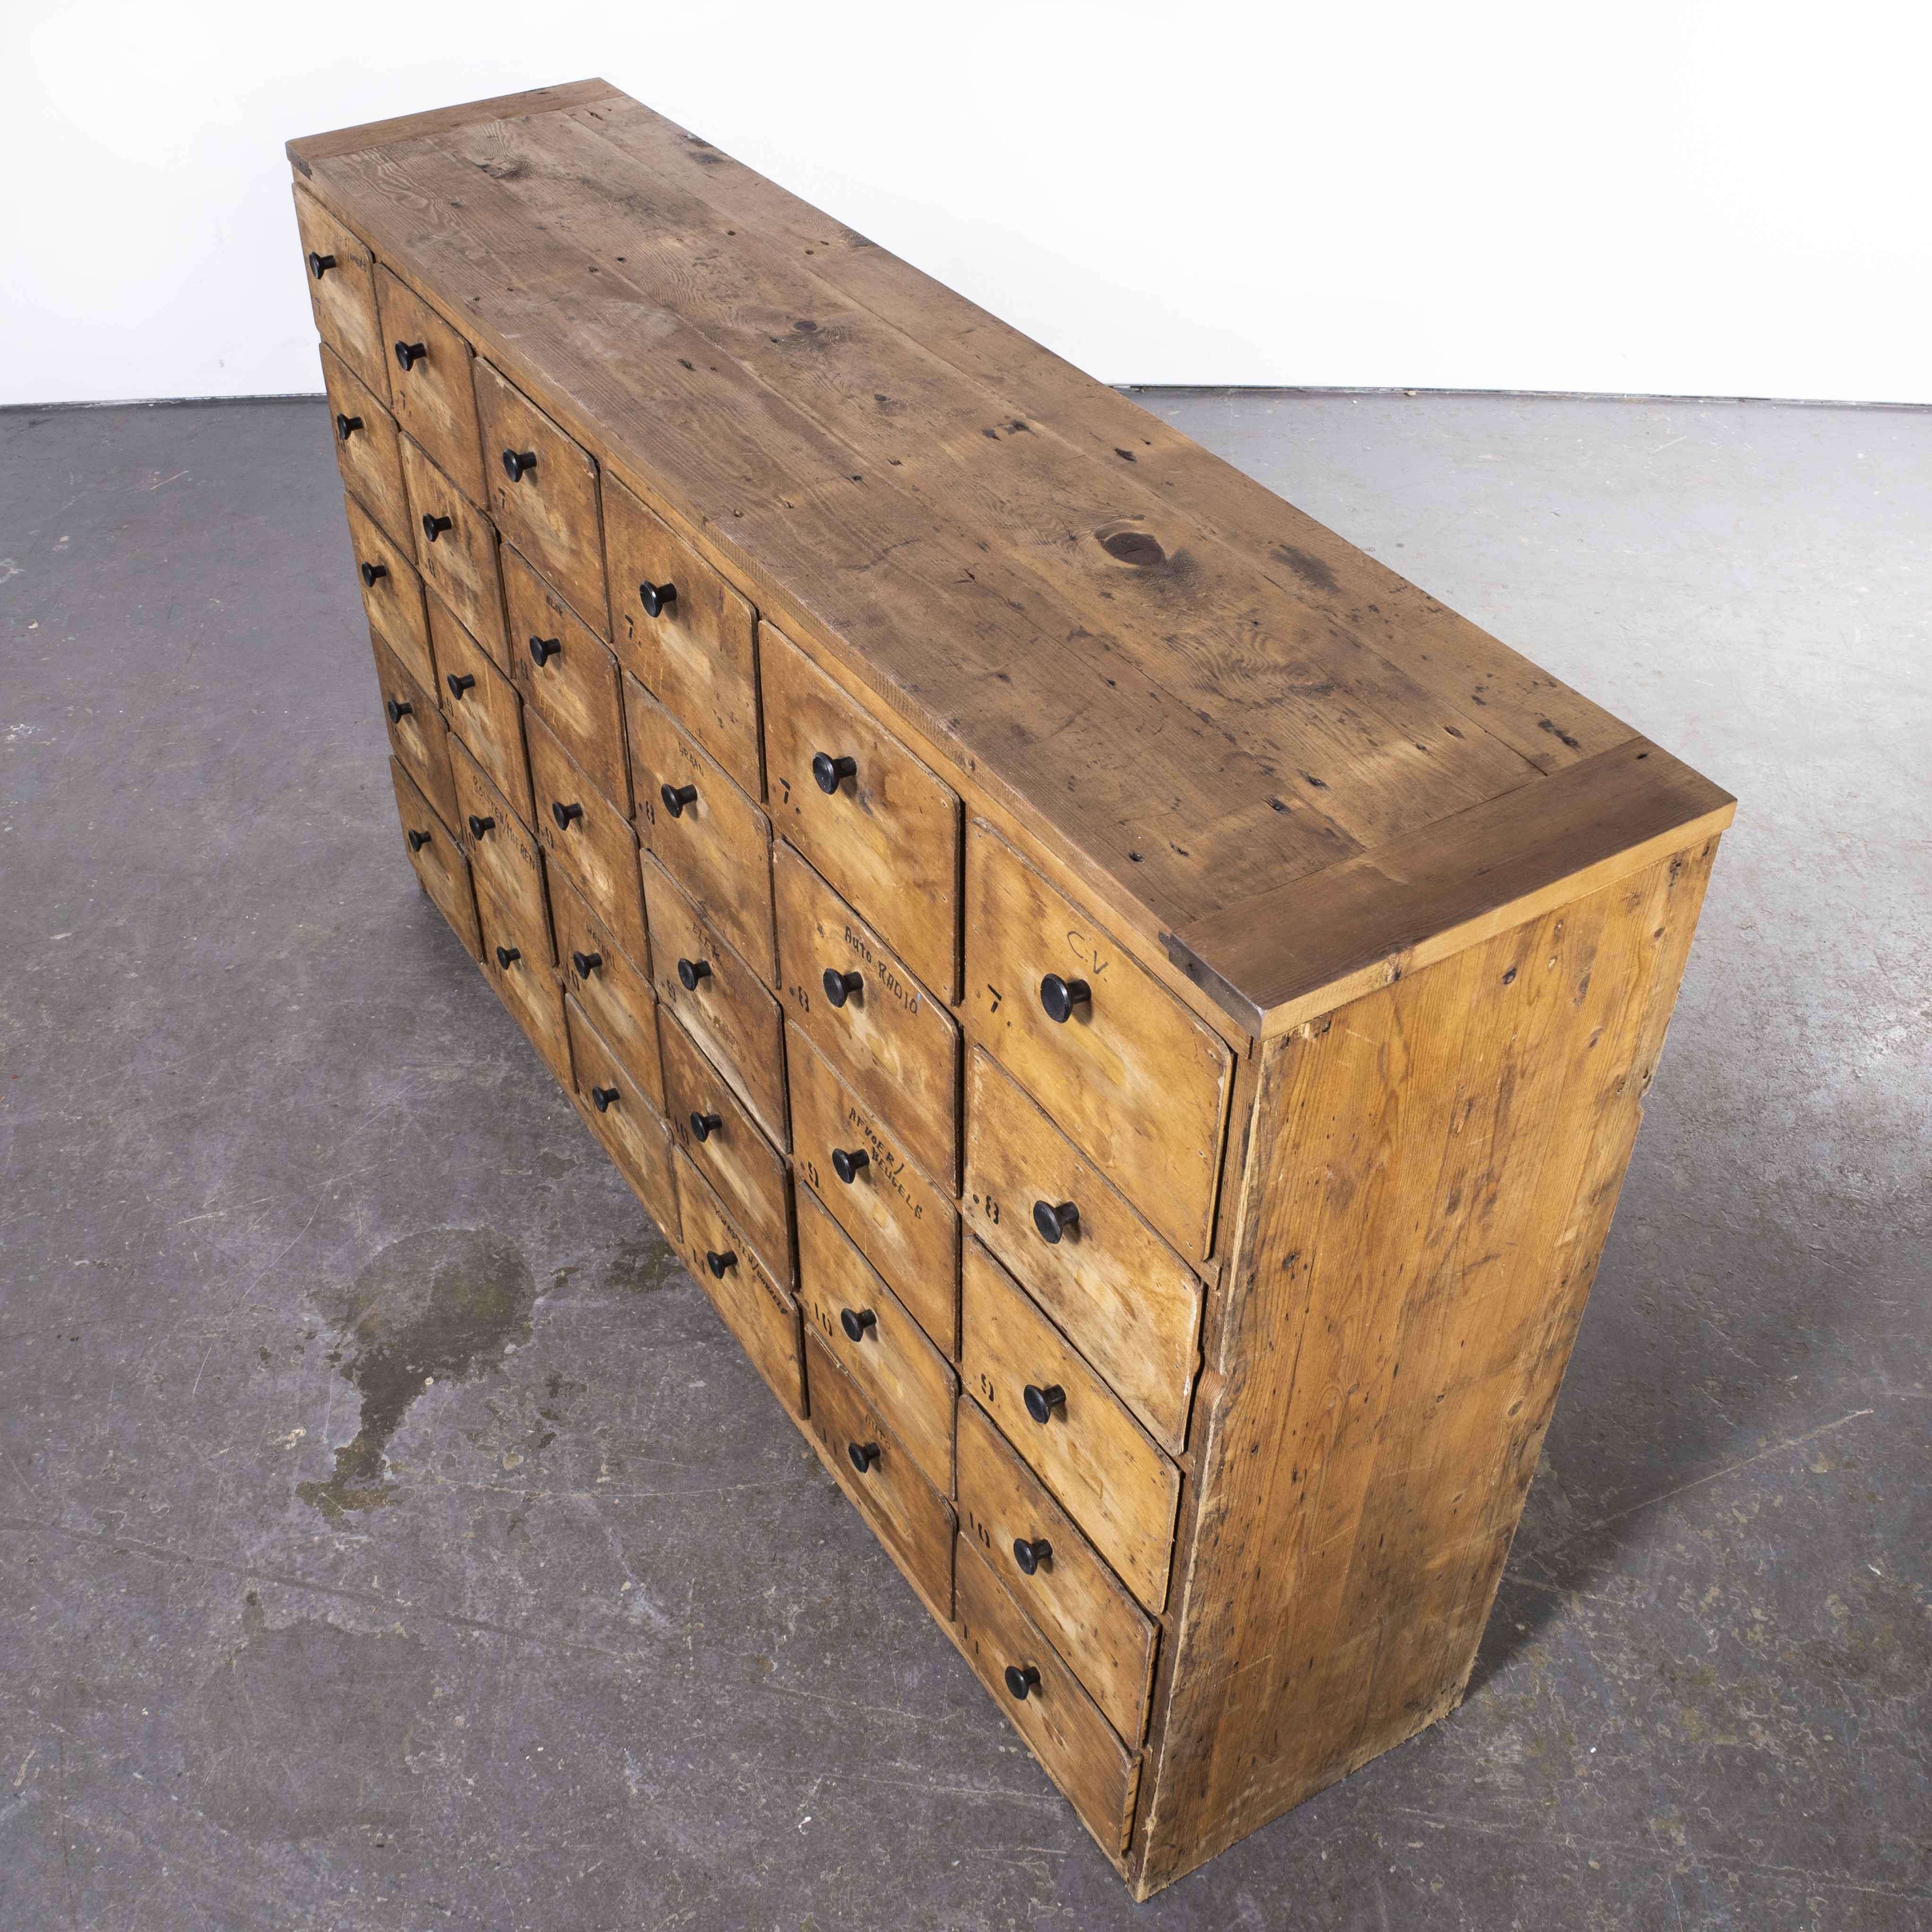 1950?s Belgian workshop bank of drawers ? Thirty drawers

1950?s Belgian workshop bank of drawers ? Thirty drawers. We love this rough and ready bank of workshop drawers from Belgium. Probably handmade by the workshop owner, the drawers have great